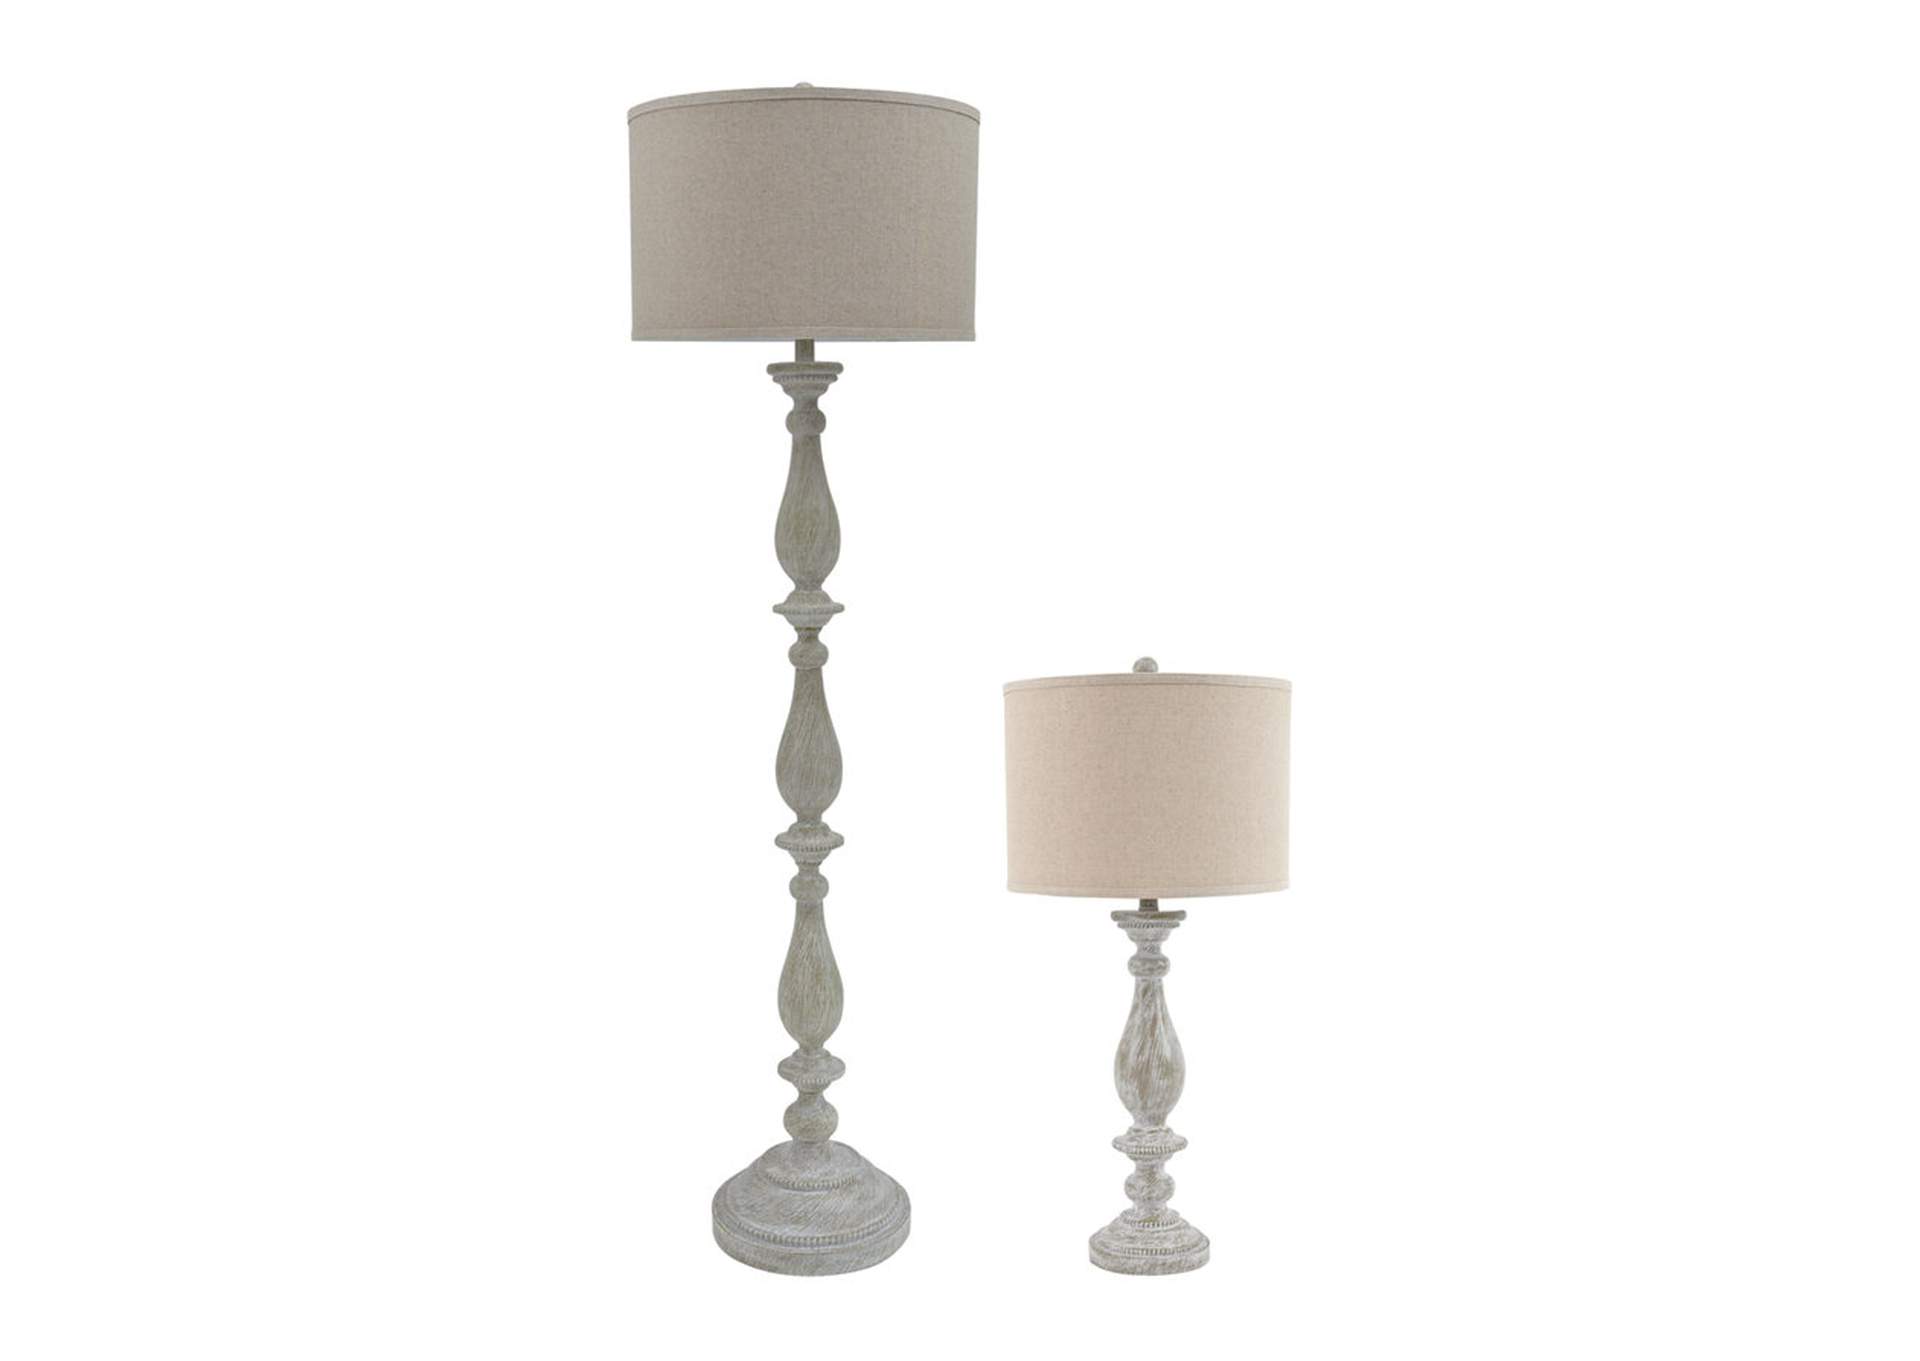 Bernadate 3-Piece Floor Lamp with 2 Table Lamps Set,Signature Design By Ashley